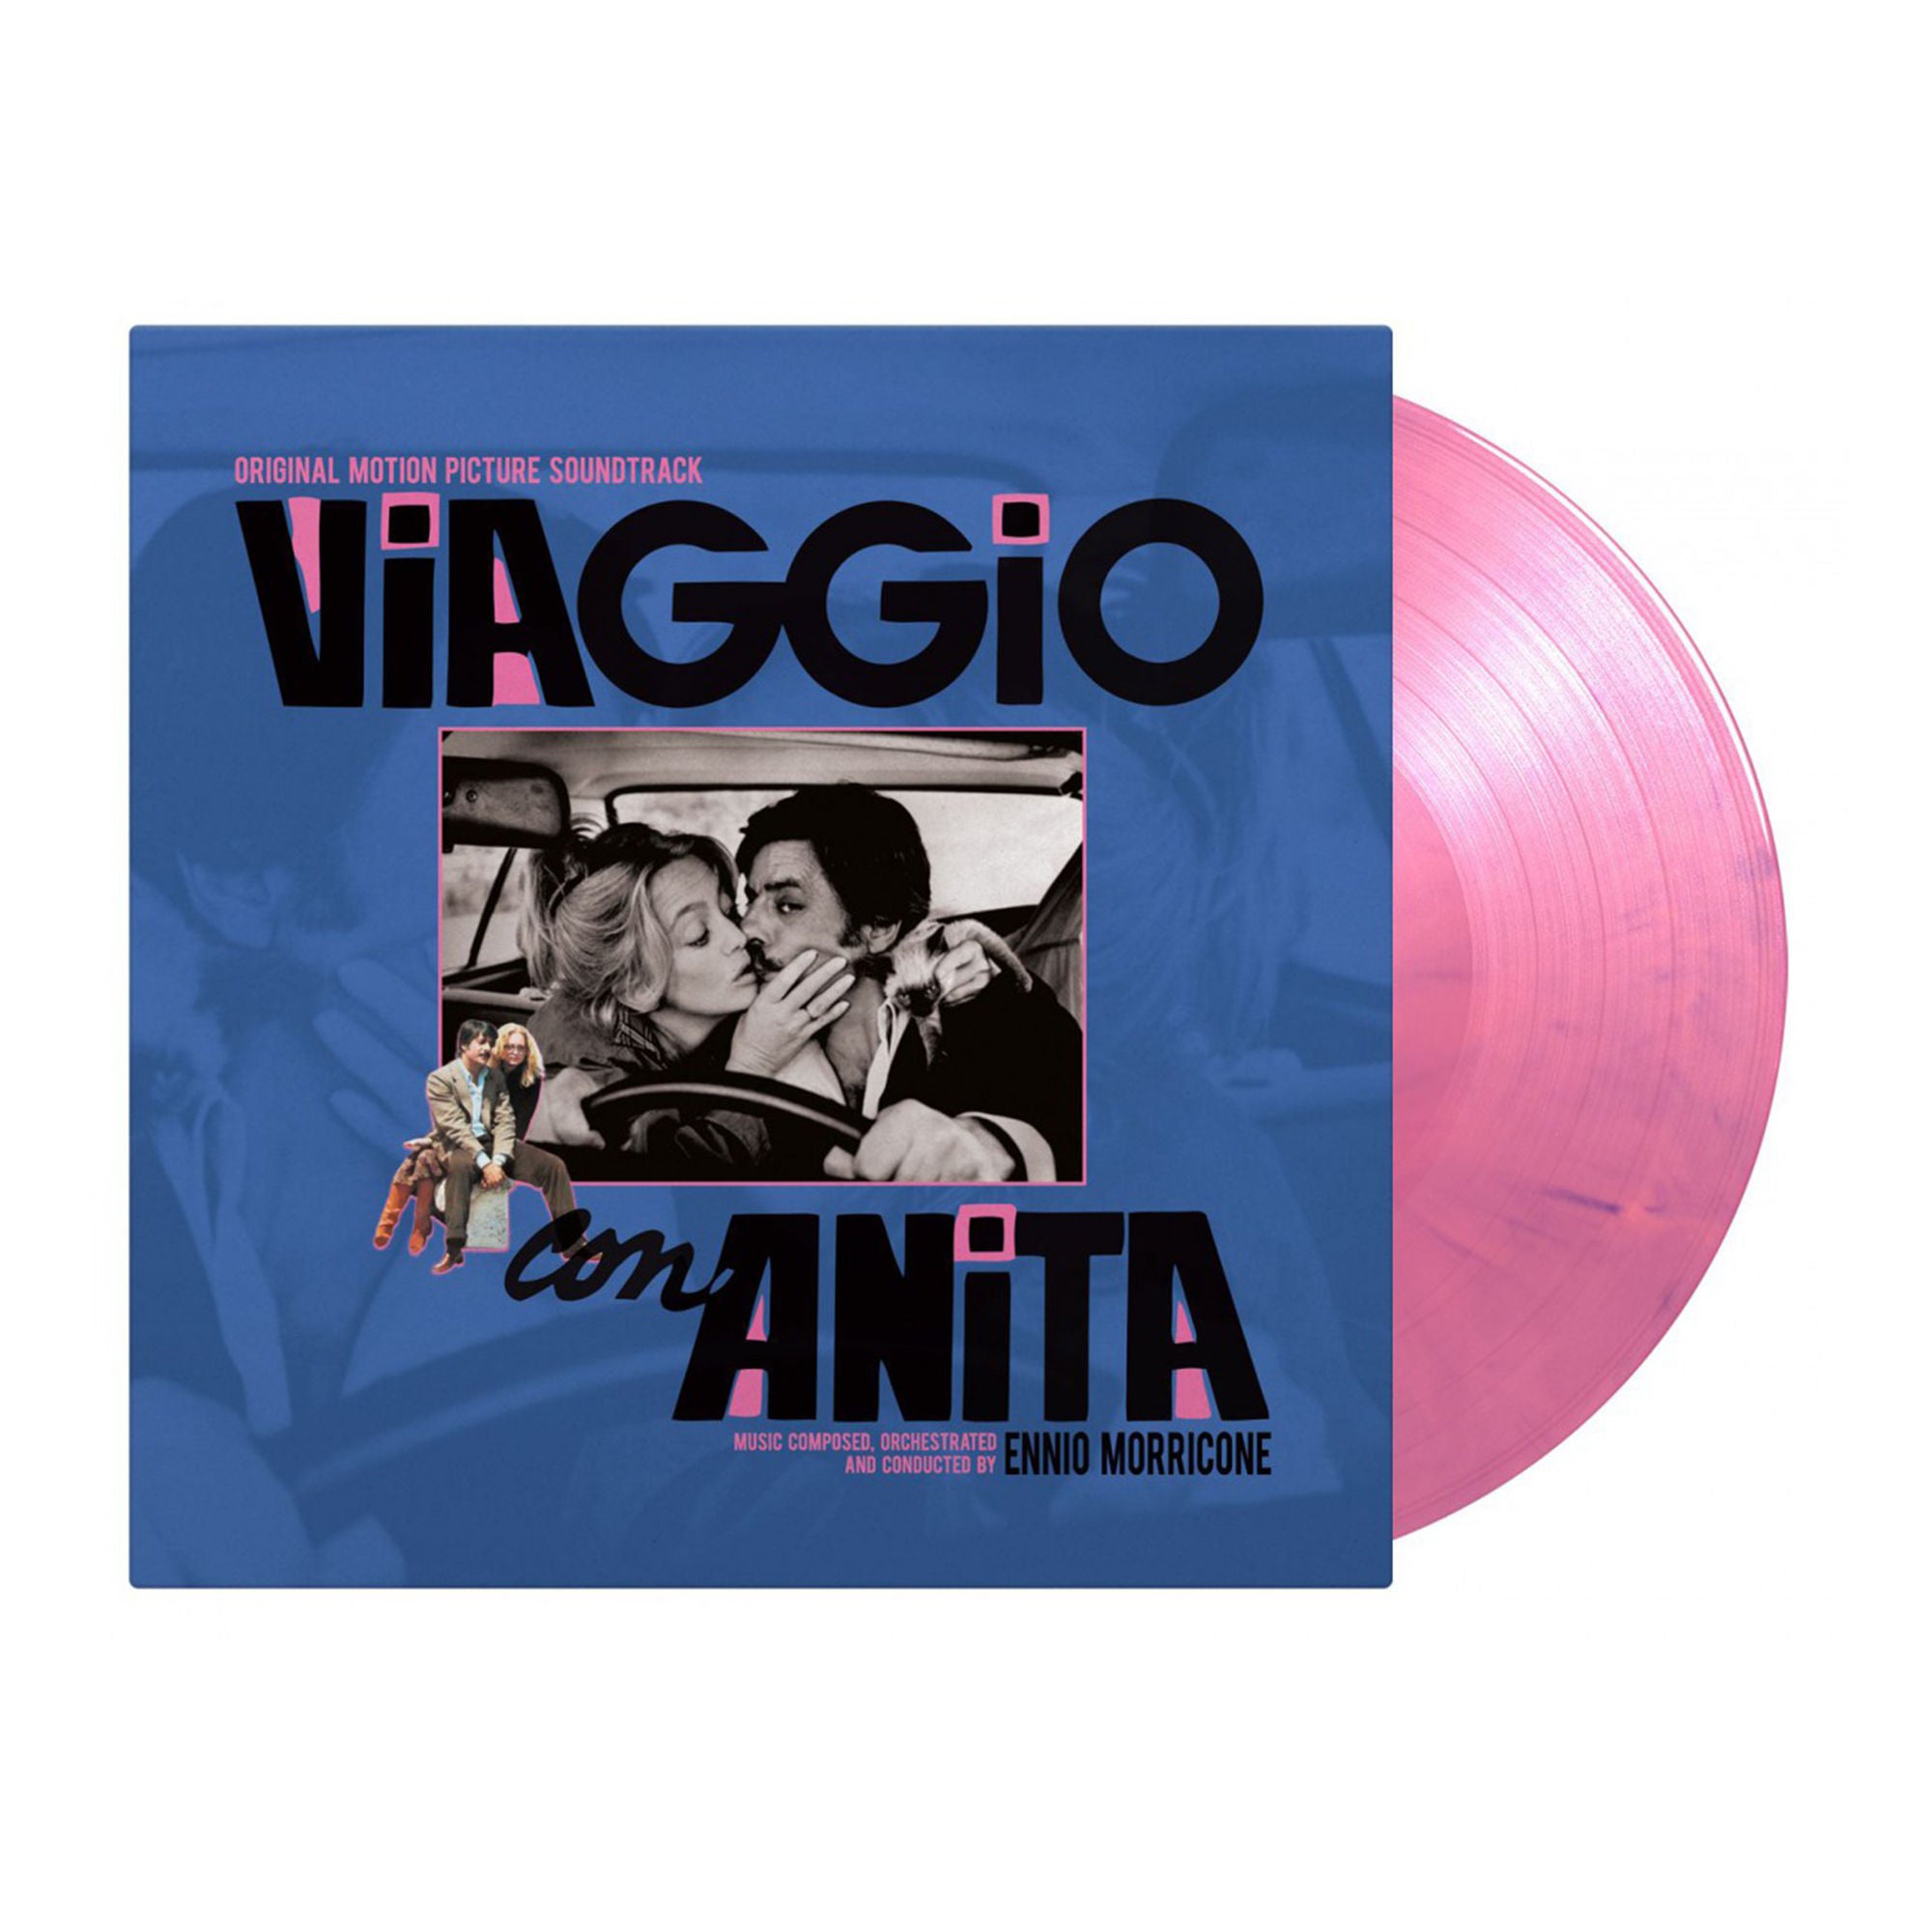 Viaggio con Anita (Lovers and Liars): Limited Pink + Purple Marbled Vinyl LP